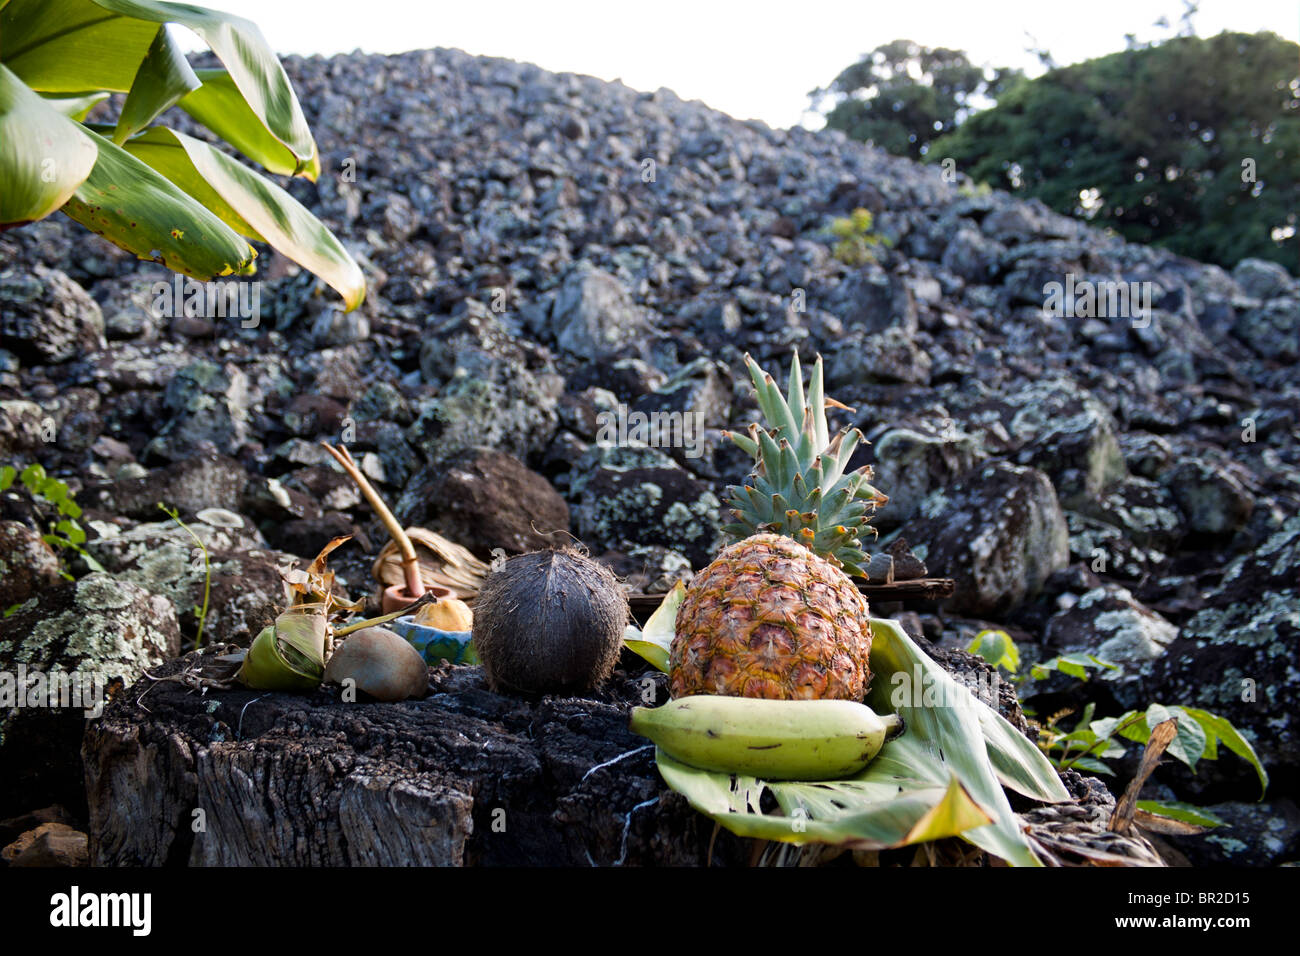 Offerings of food left at an altar at the bottom Hawaiian Heiau (temple) man-made stone structure Stock Photo